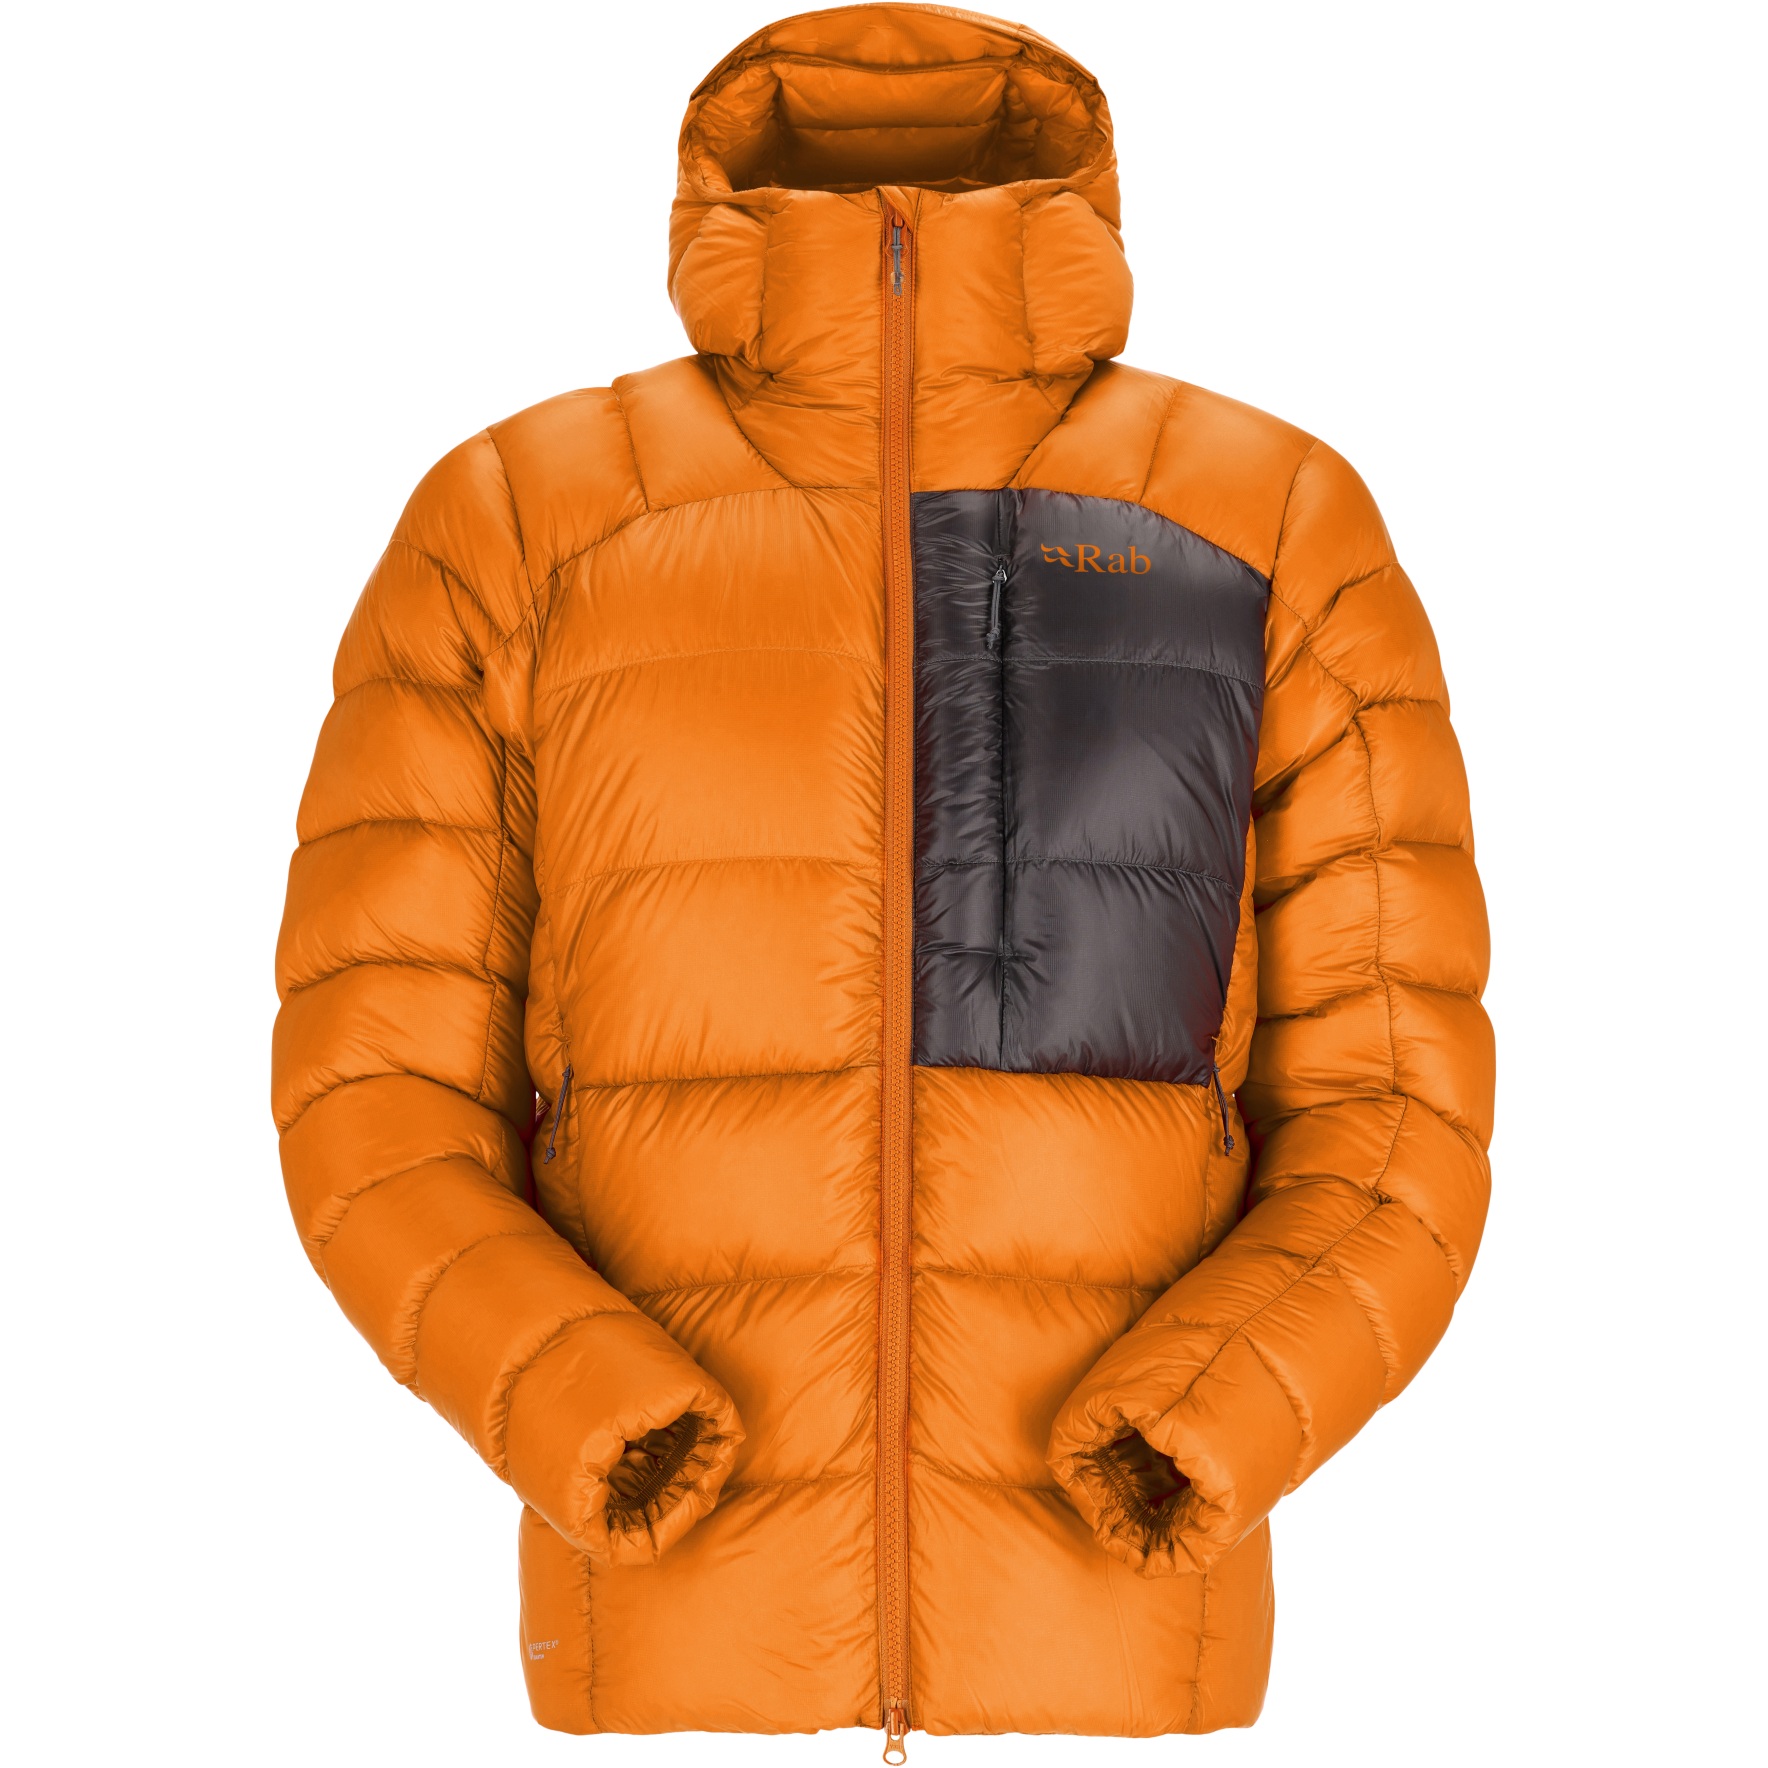 Picture of Rab Mythic Ultra Down Jacket - marmalade